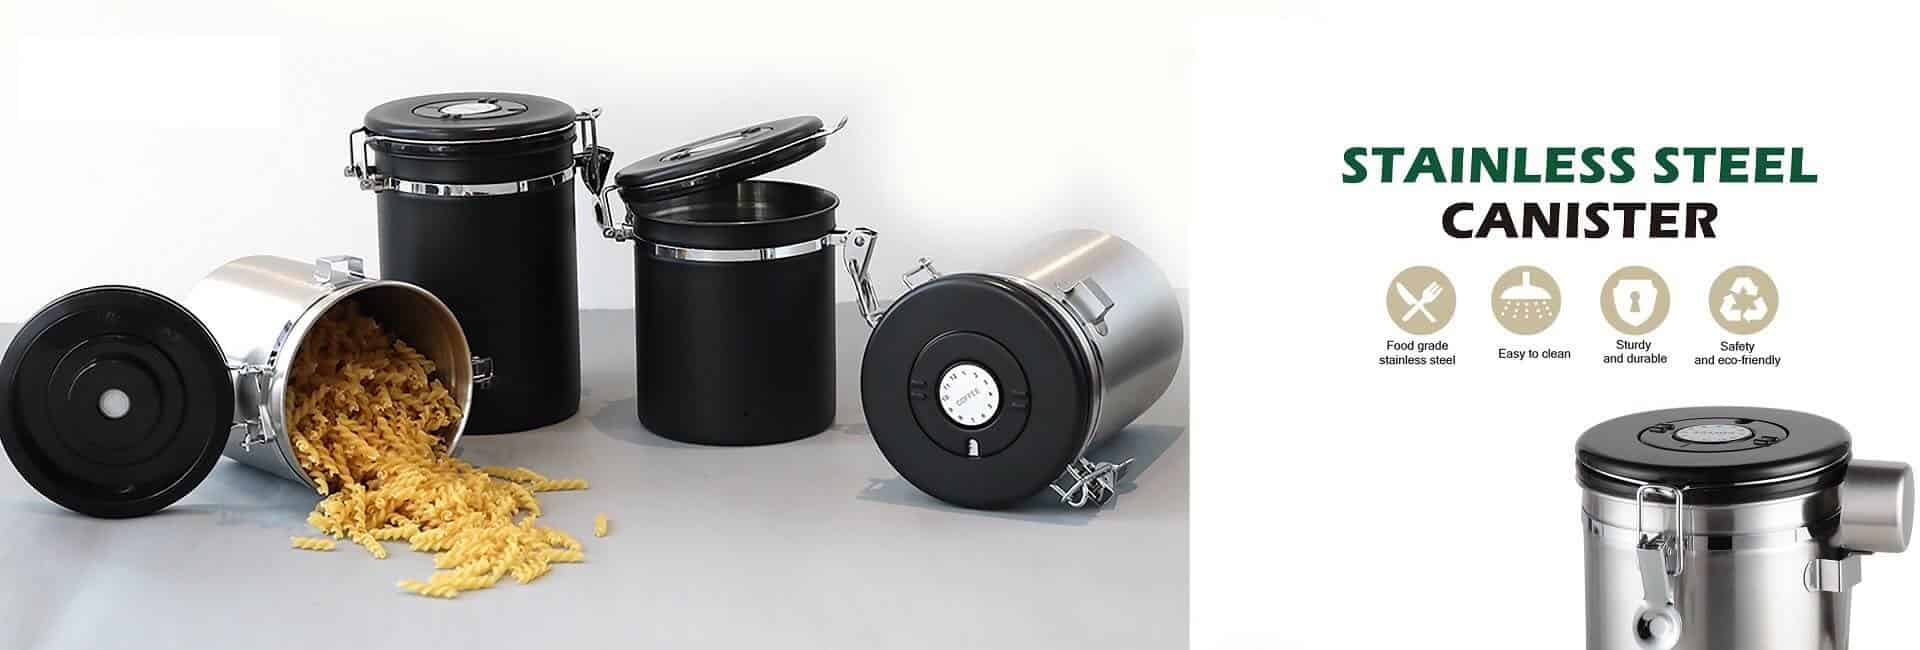 https://www.flytinbottle.com/wp-content/uploads/2022/05/airtight-stainless-steel-coffee-container.jpg